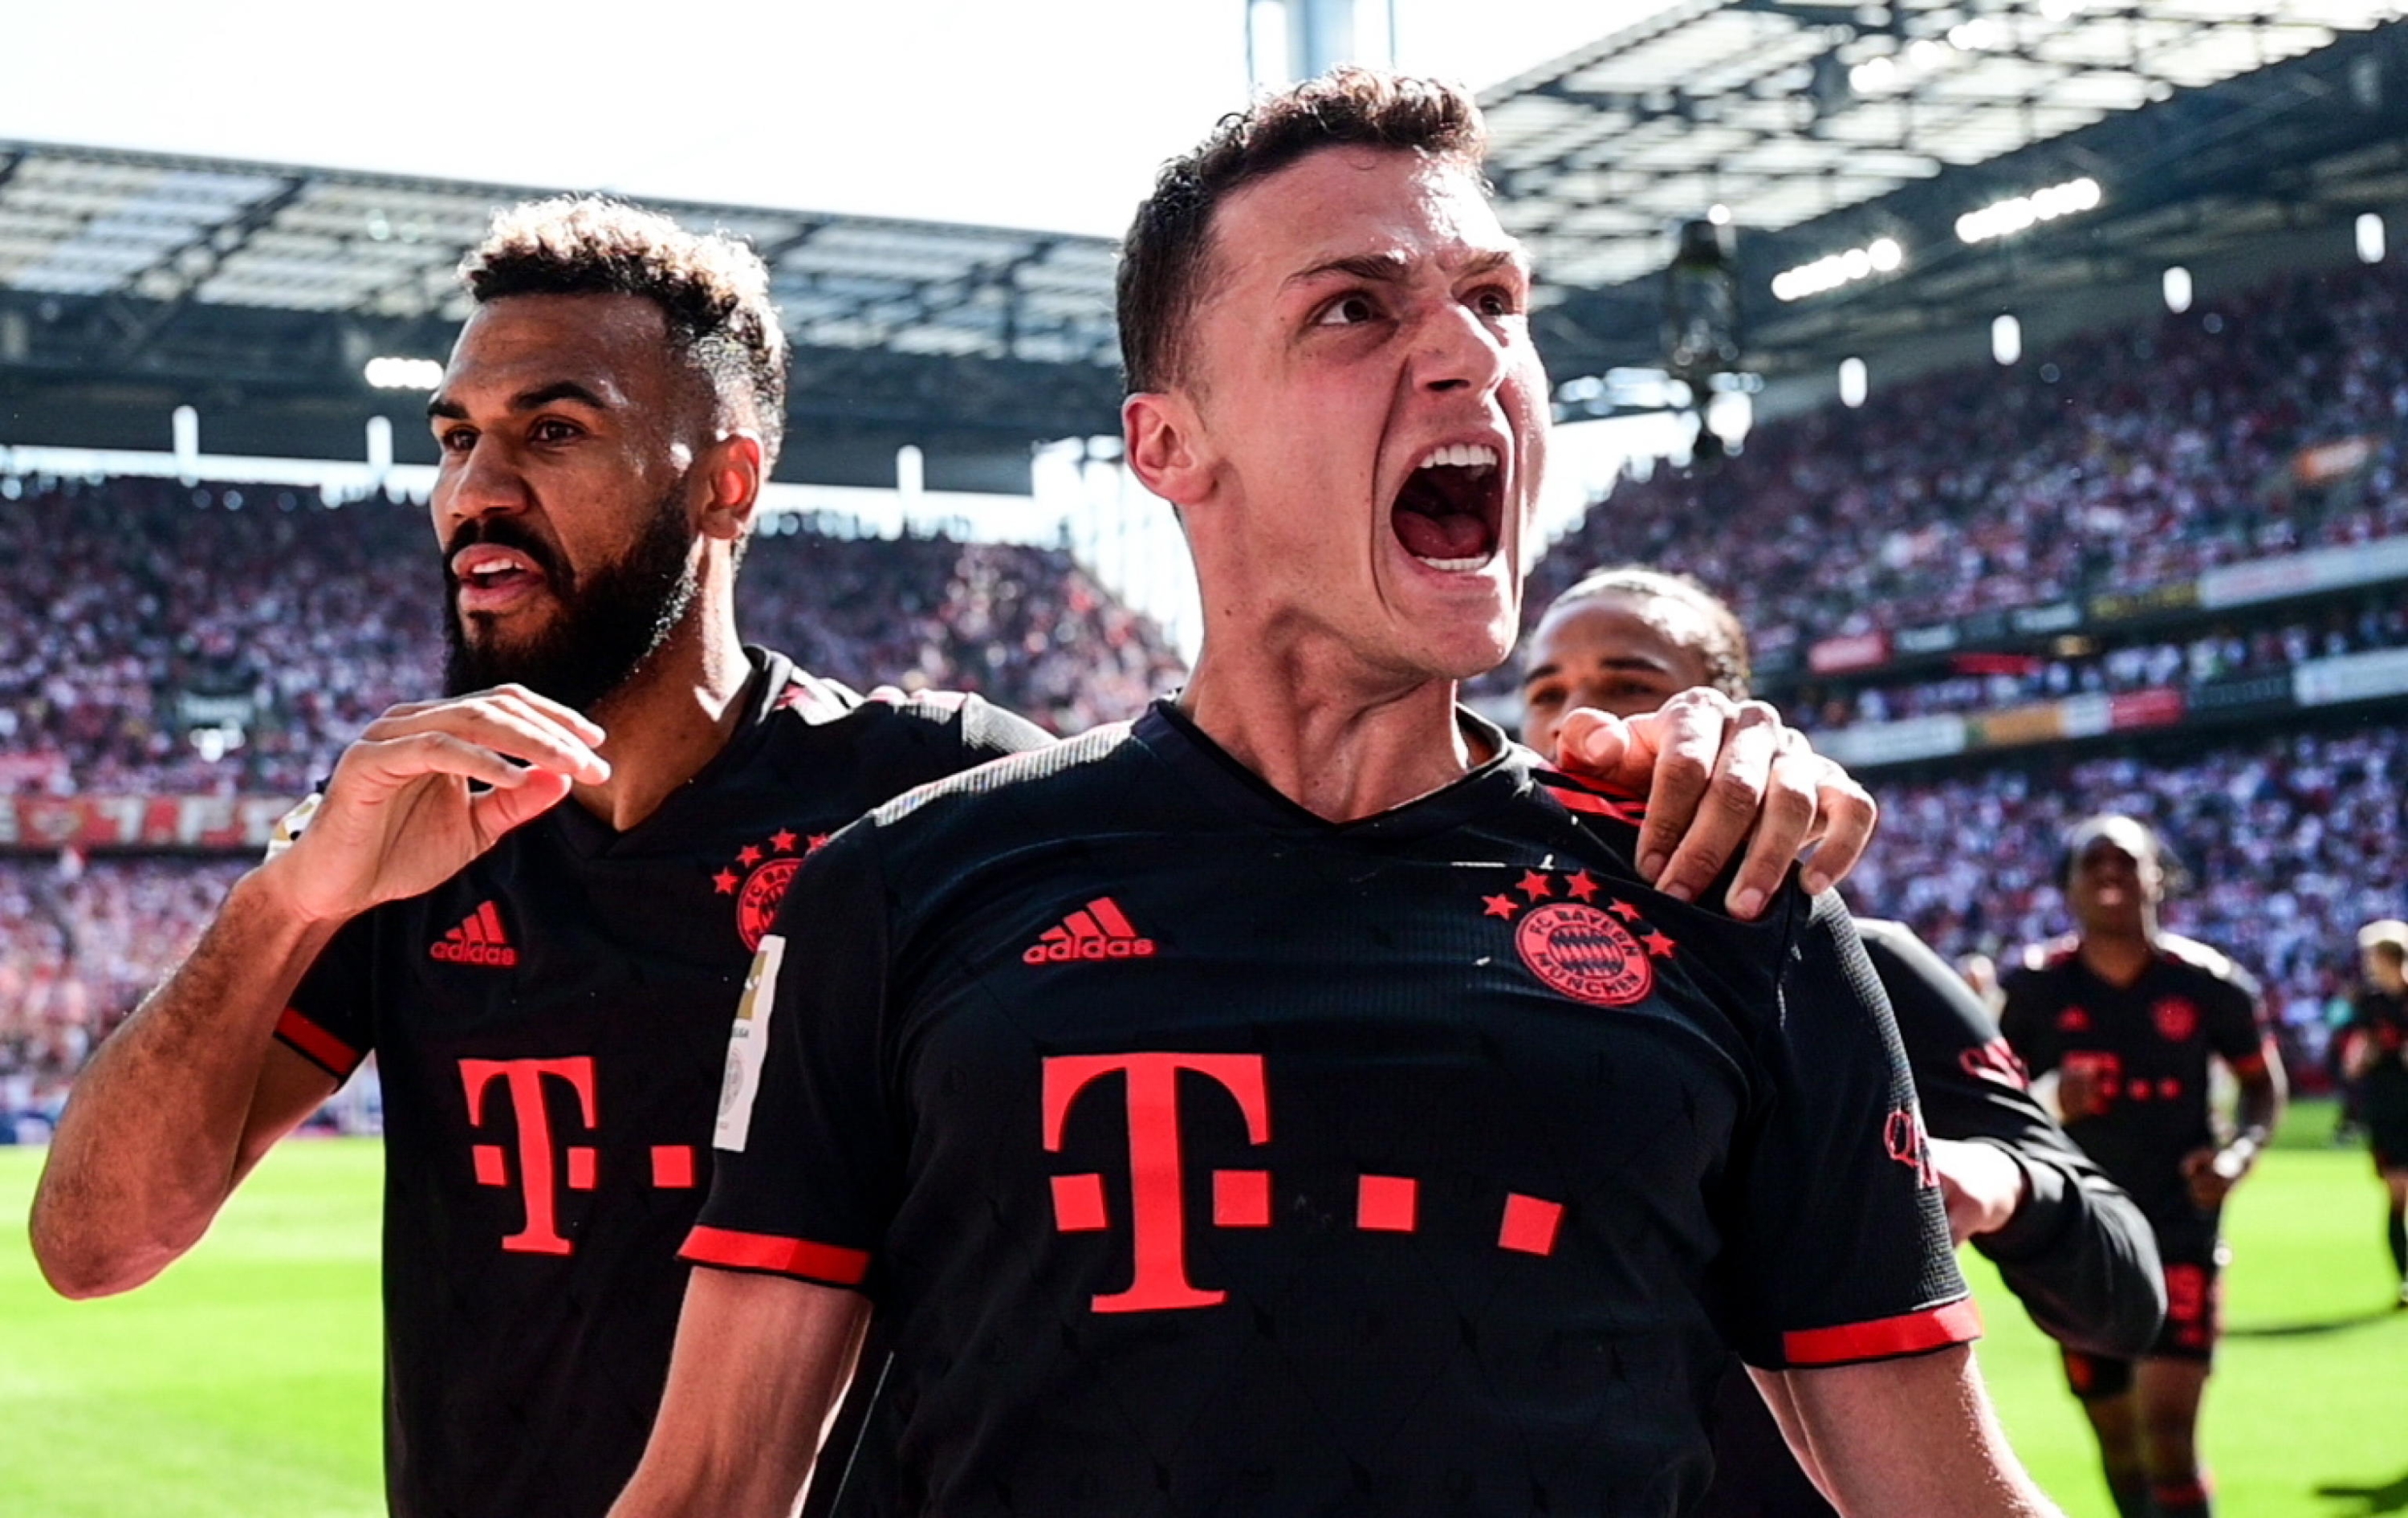 epa10659551 Bayern Munich's Benjamin Pavard (R) and Eric Maxim Choupo-Moting celebrate after winning the German Bundesliga soccer match between 1.FC Cologne and FC Bayern Munich, in Cologne, Germany, 27 May 2023. Both Bayern Munich and Borussia Dortmund finished the season on 71 points but Bayern won the title due to a better goal difference.  EPA/Filip Singer CONDITIONS - ATTENTION:  The DFL regulations prohibit any use of photographs as image sequences and/or quasi-video.